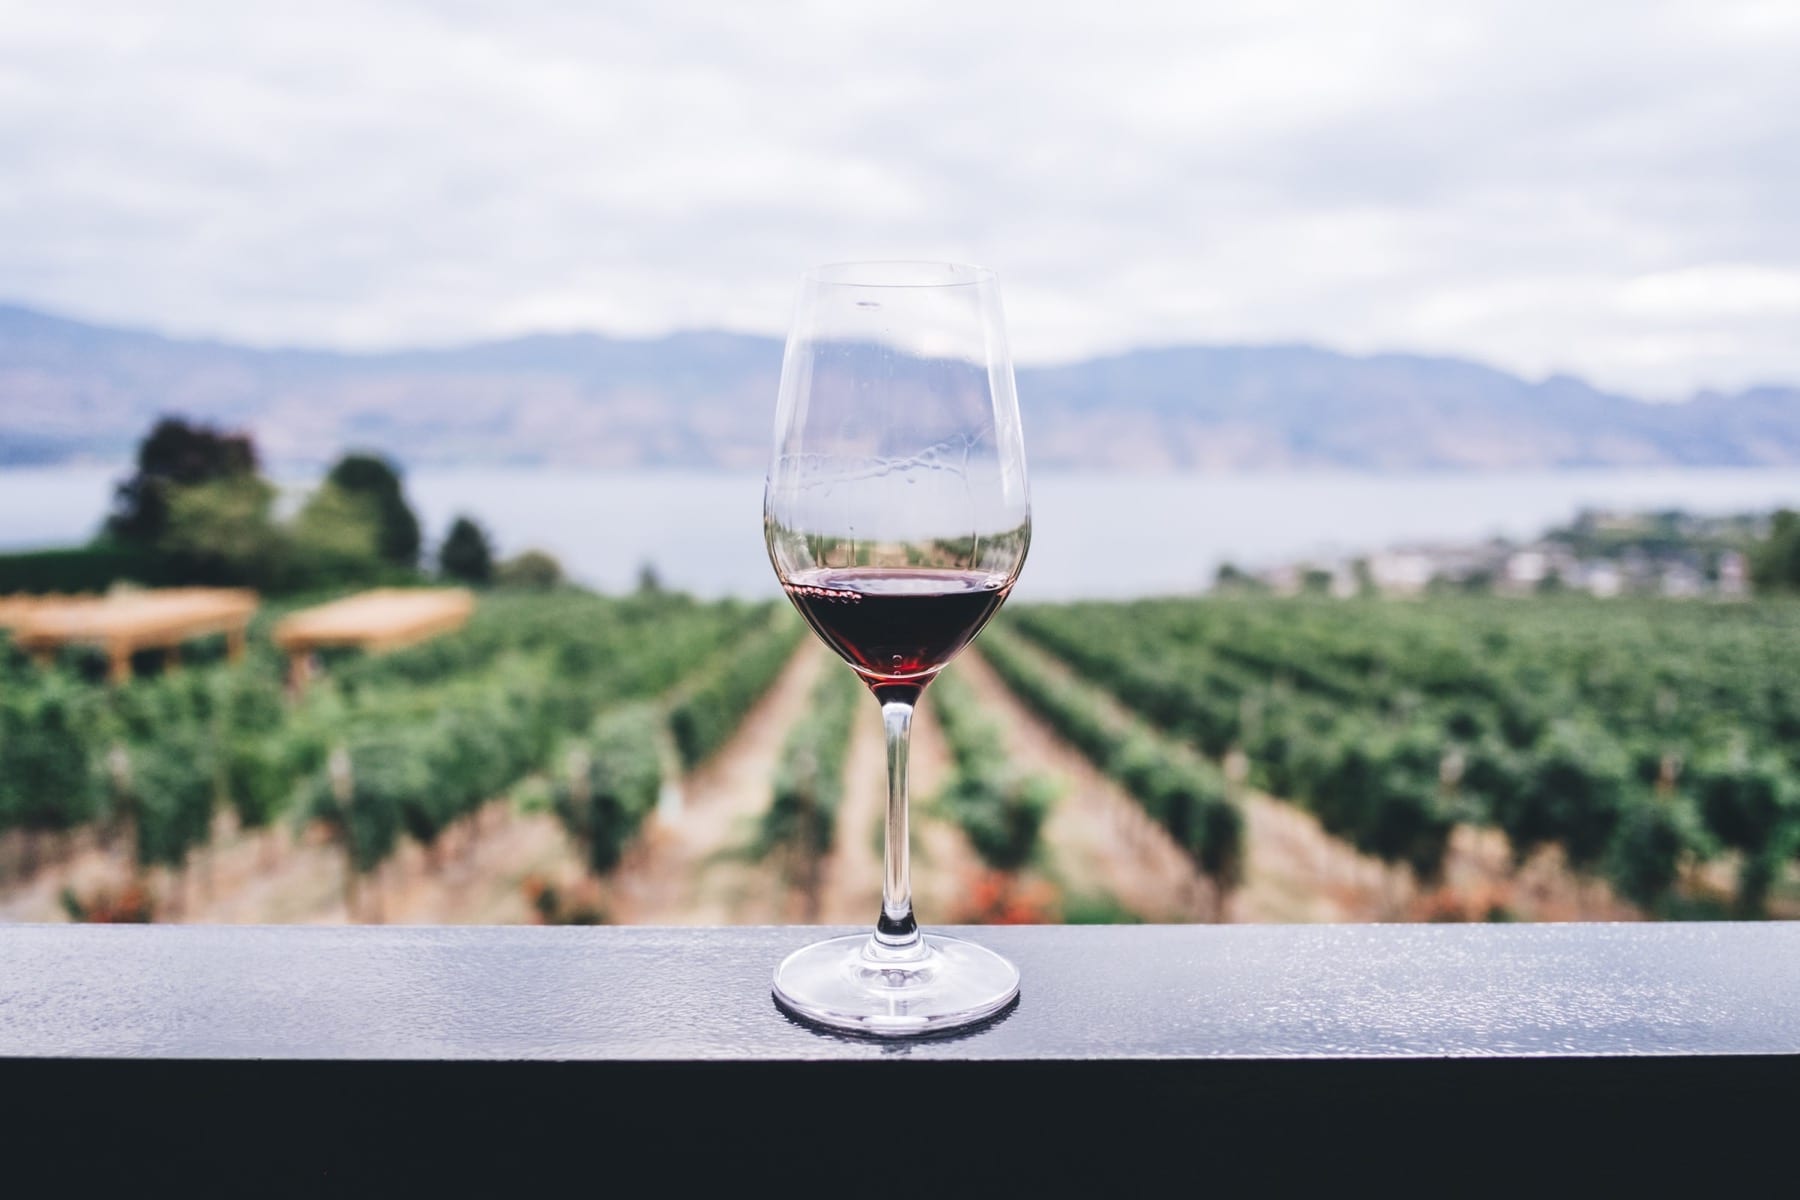 Wine. A lesson on mindfulness